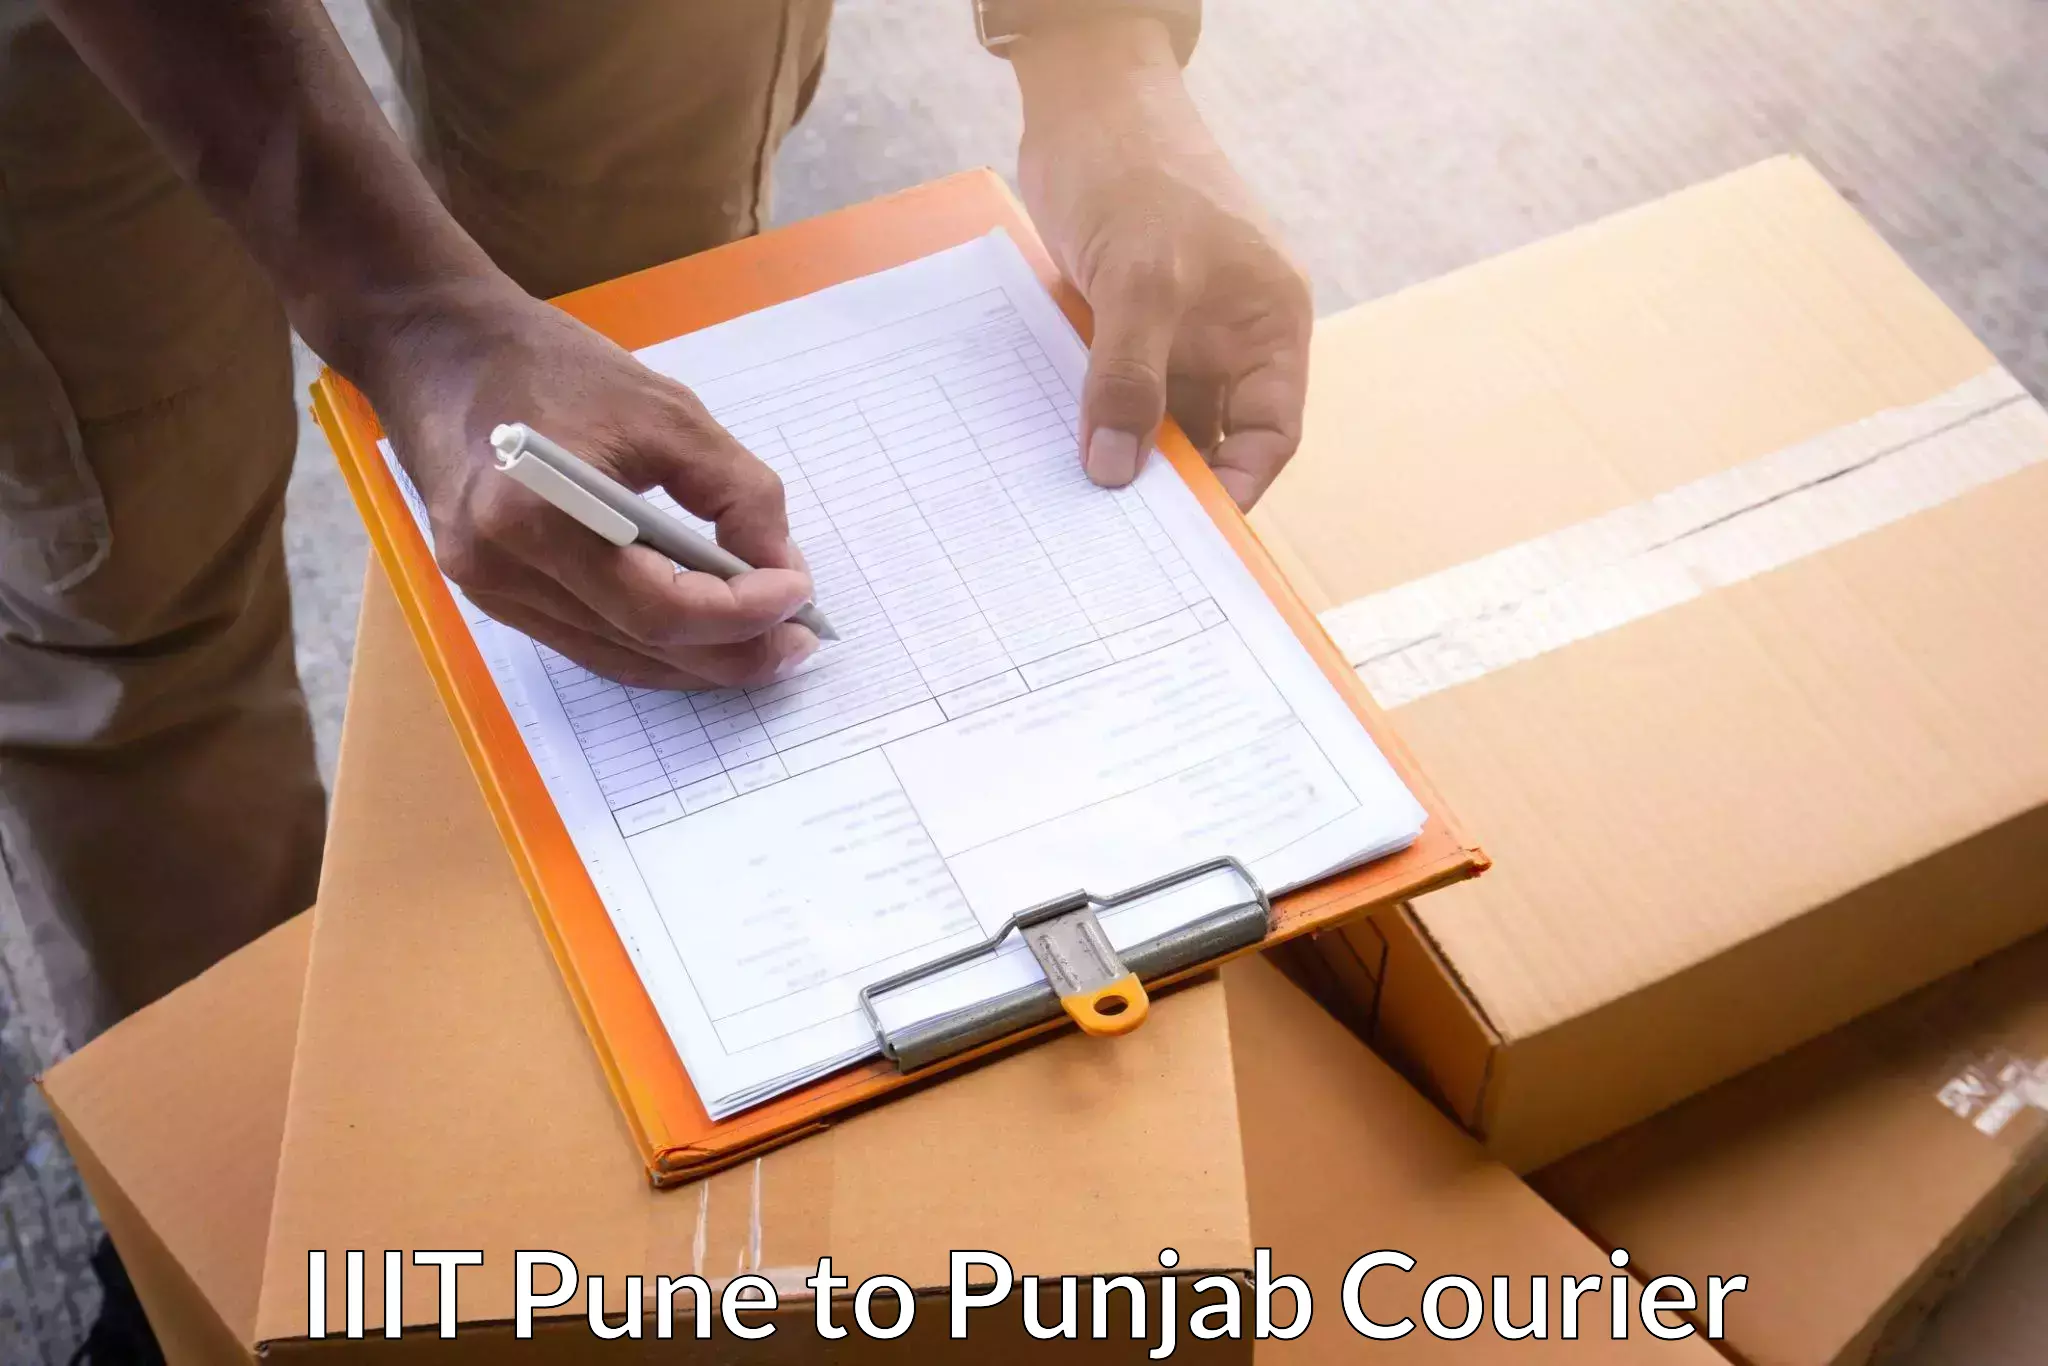 Nationwide delivery network IIIT Pune to Punjab